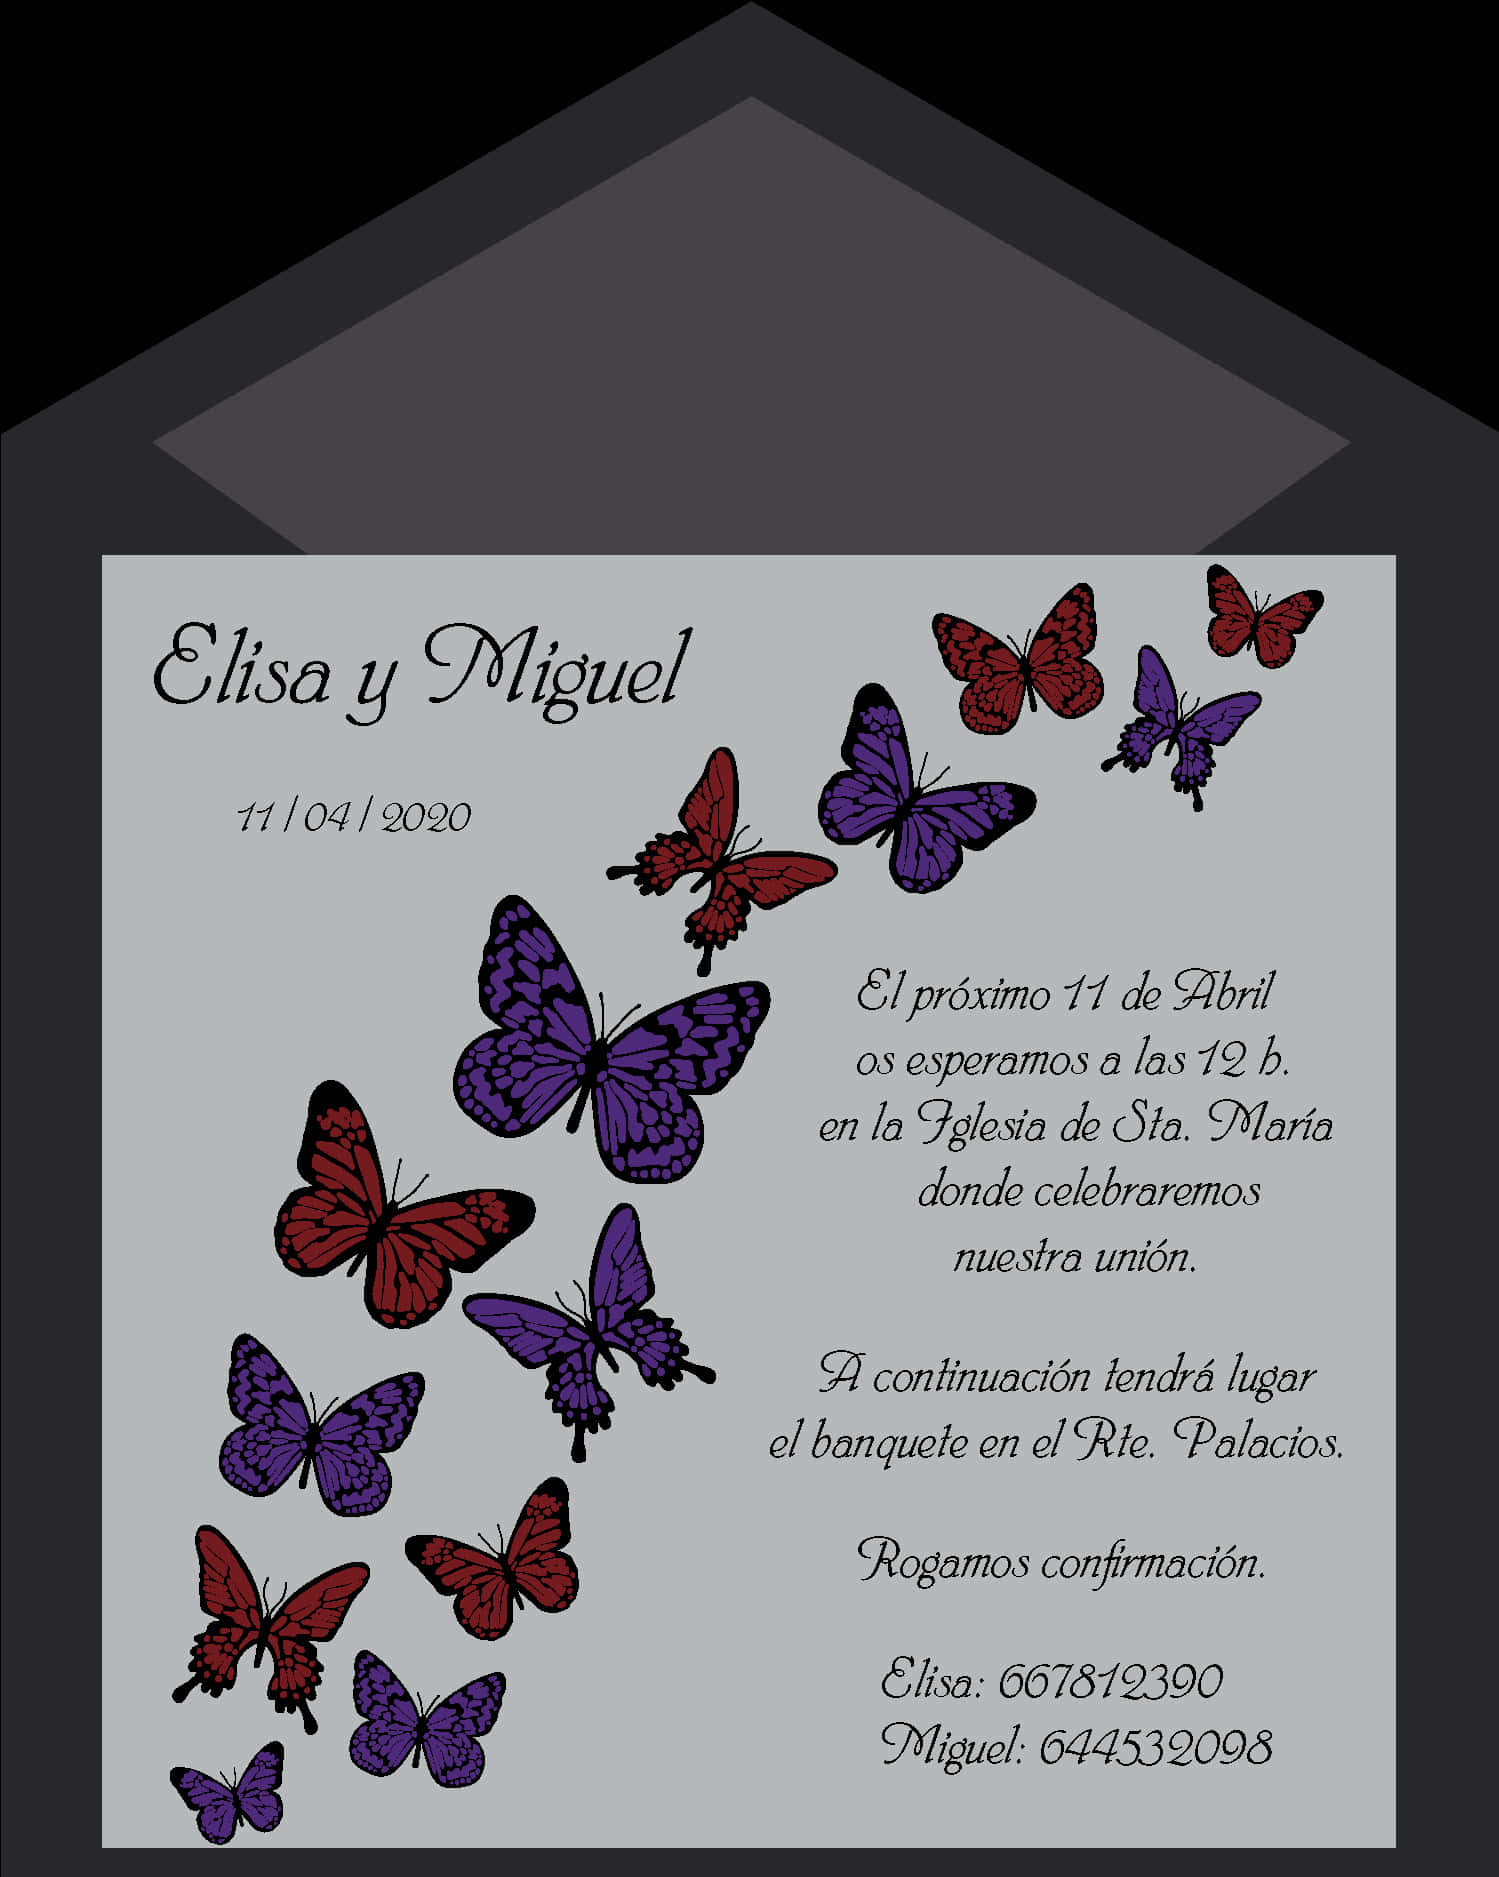 A Invitation With Butterflies On It